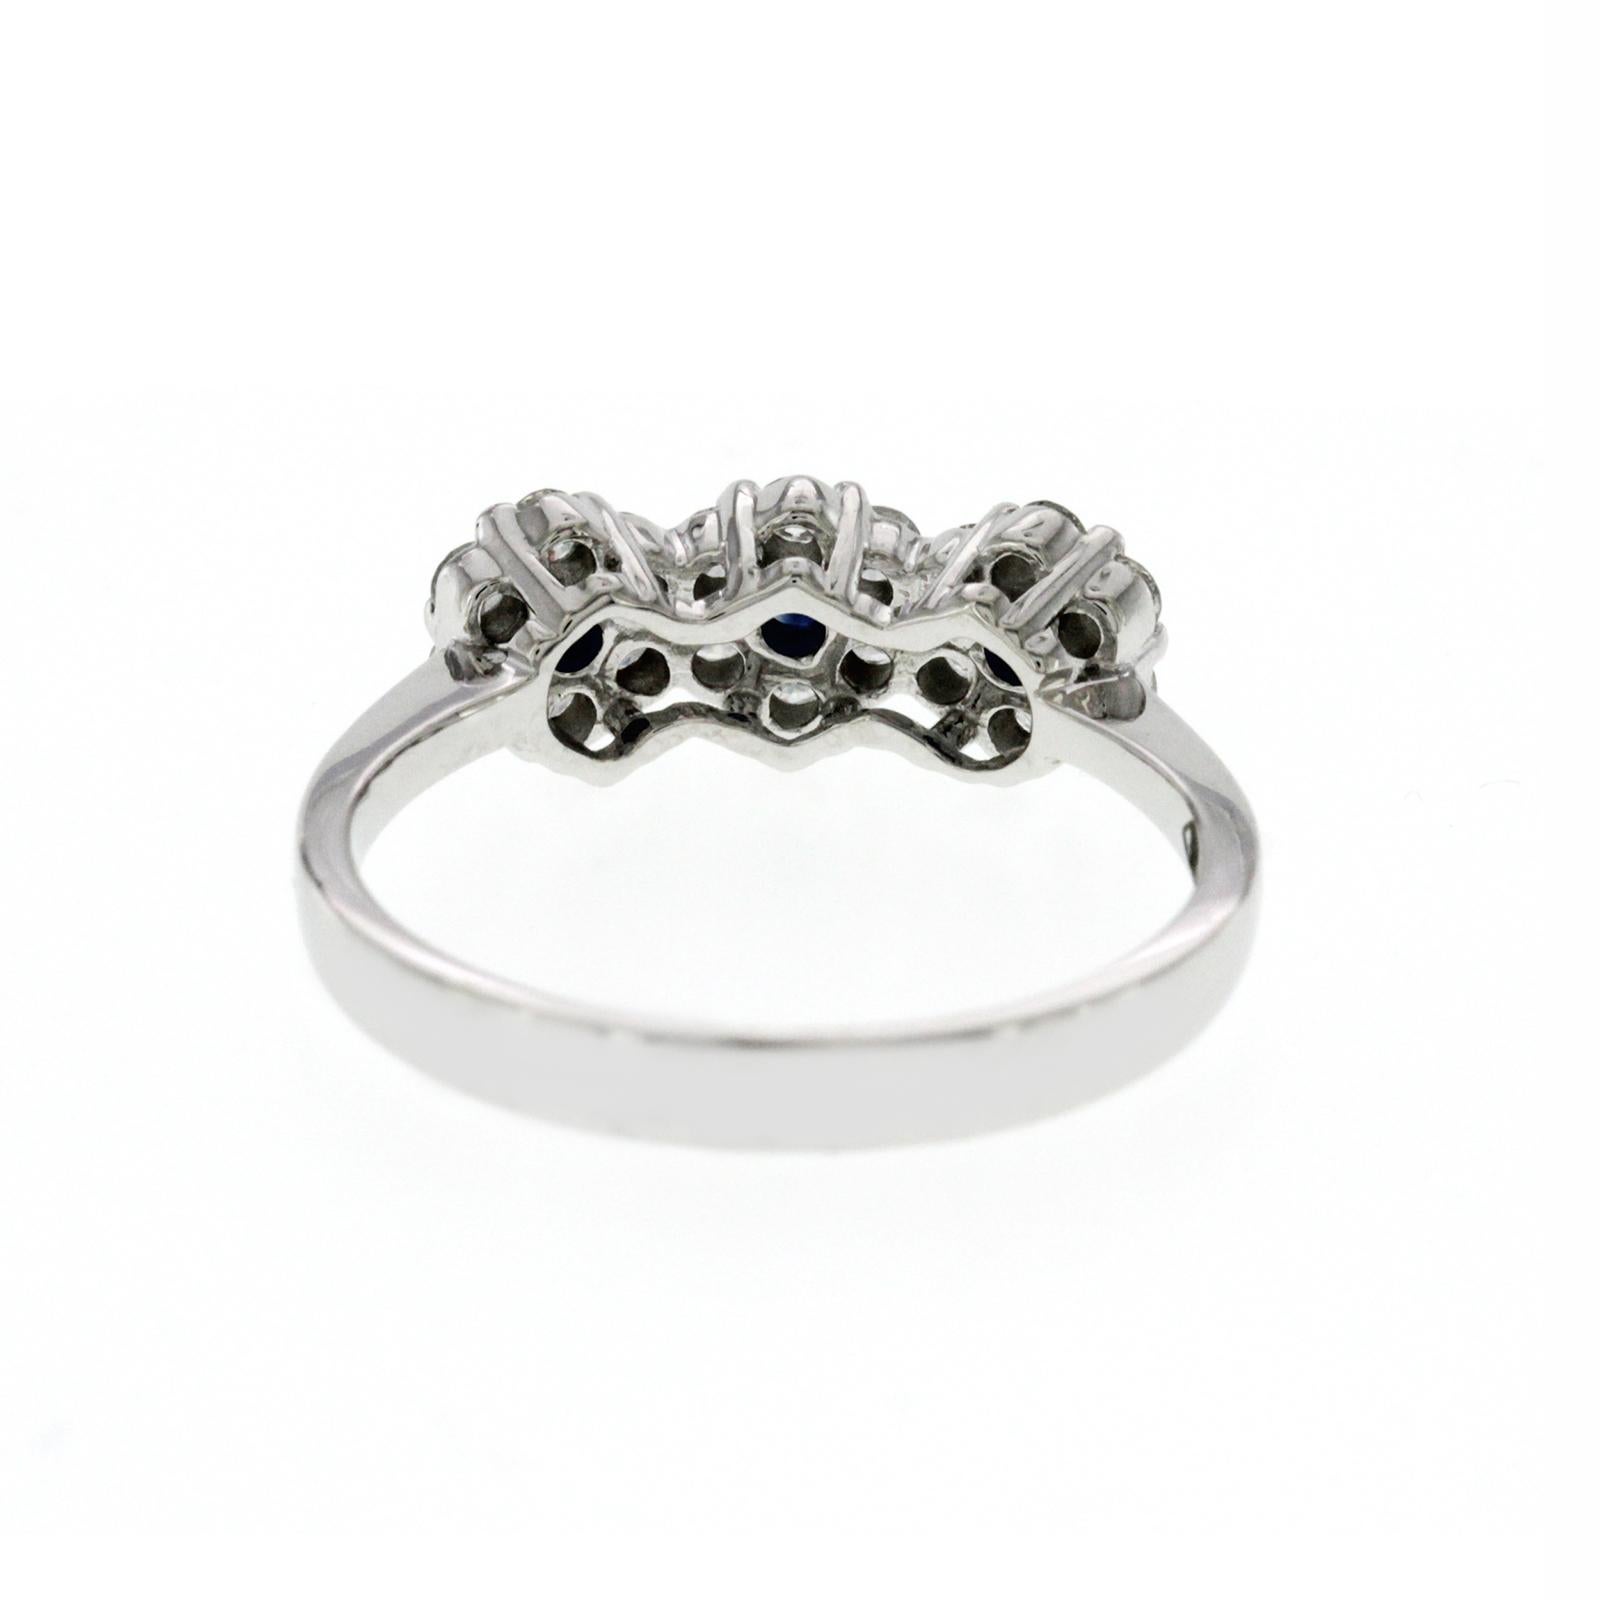 Piero Milano 18K White Gold 0.39ct Diamonds & Sapphire 3 Flower Band Ring In New Condition For Sale In Los Angeles, CA